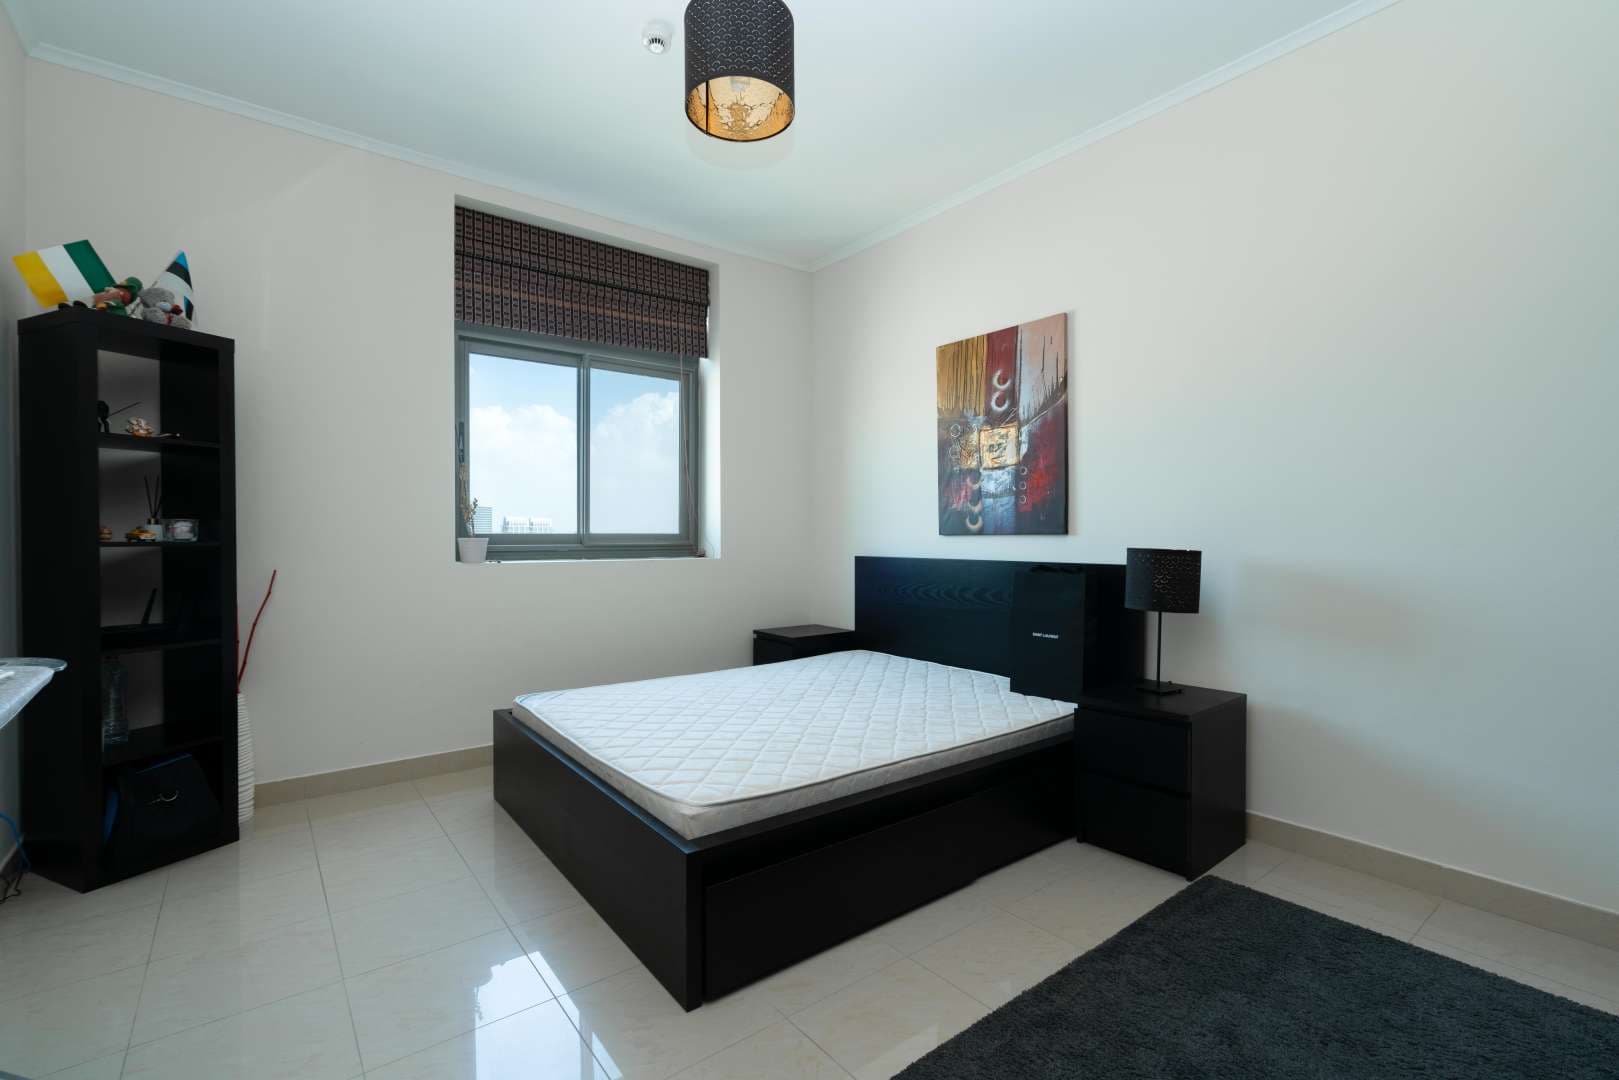 2 Bedroom Apartment For Rent The Links West Tower Lp05237 26e7a8e962575c00.jpg